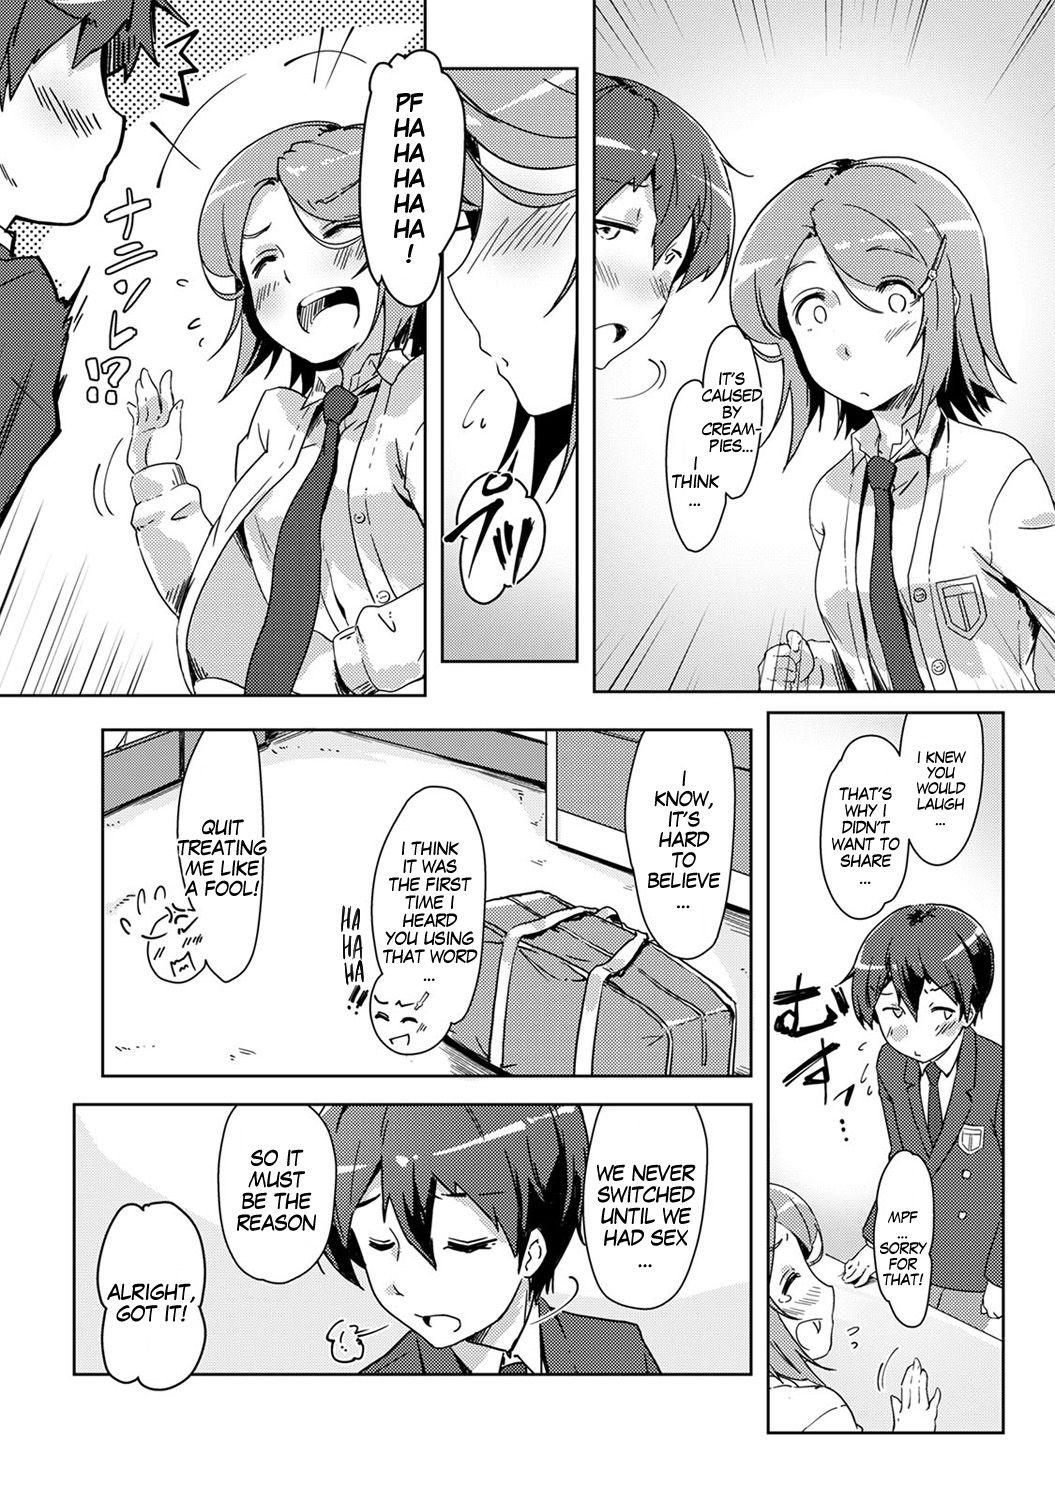 Ecchi Shitara Irekawacchatta!? | We Switched Our Bodies After Having Sex!? Ch. 4 6